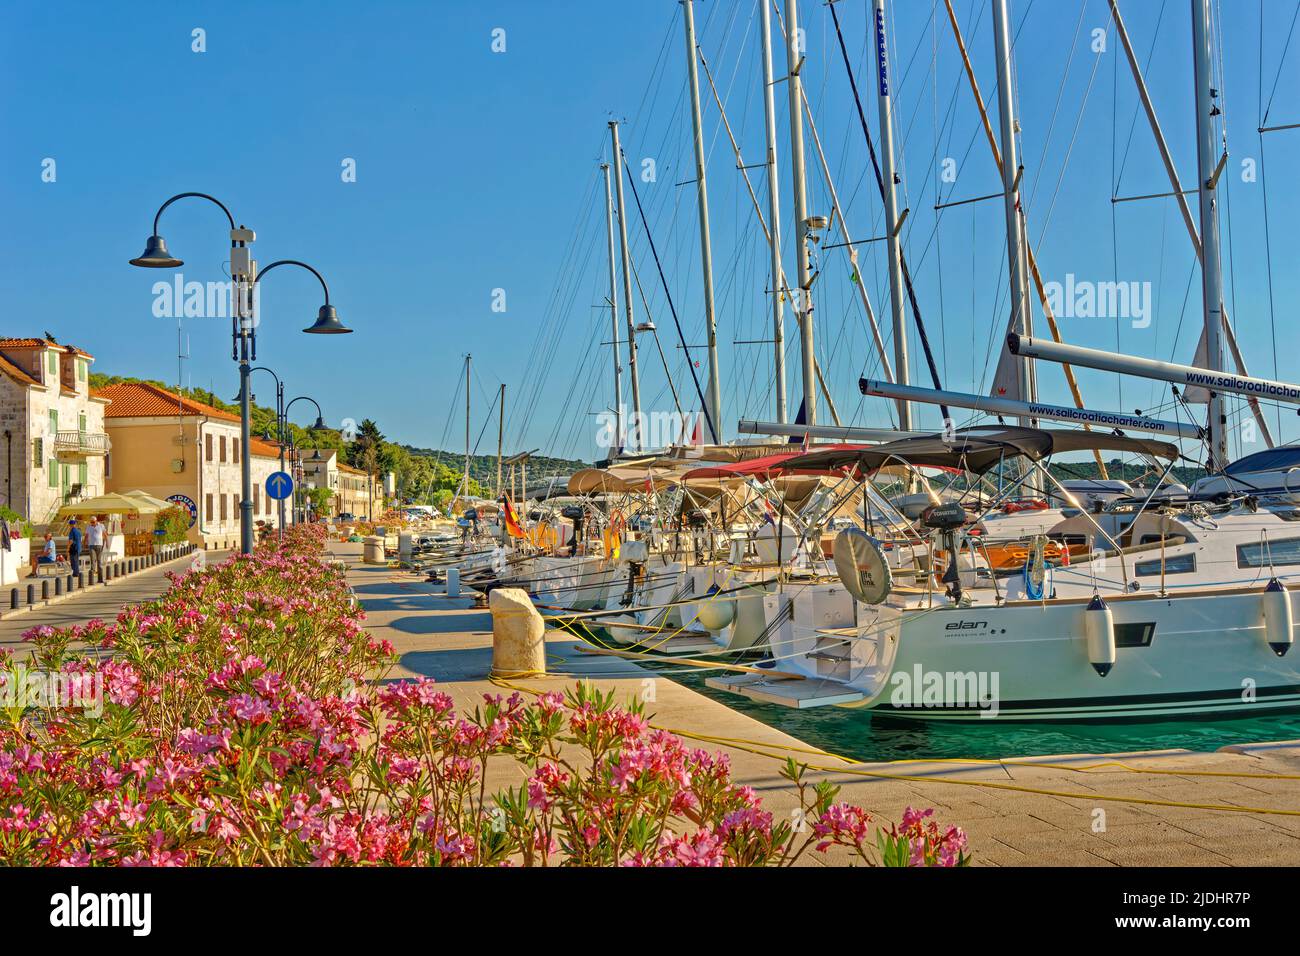 Rogoznica town quay. A popular overnight stay destination for yacht cruisers on the Central Dalamation coast in Croatia. Stock Photo